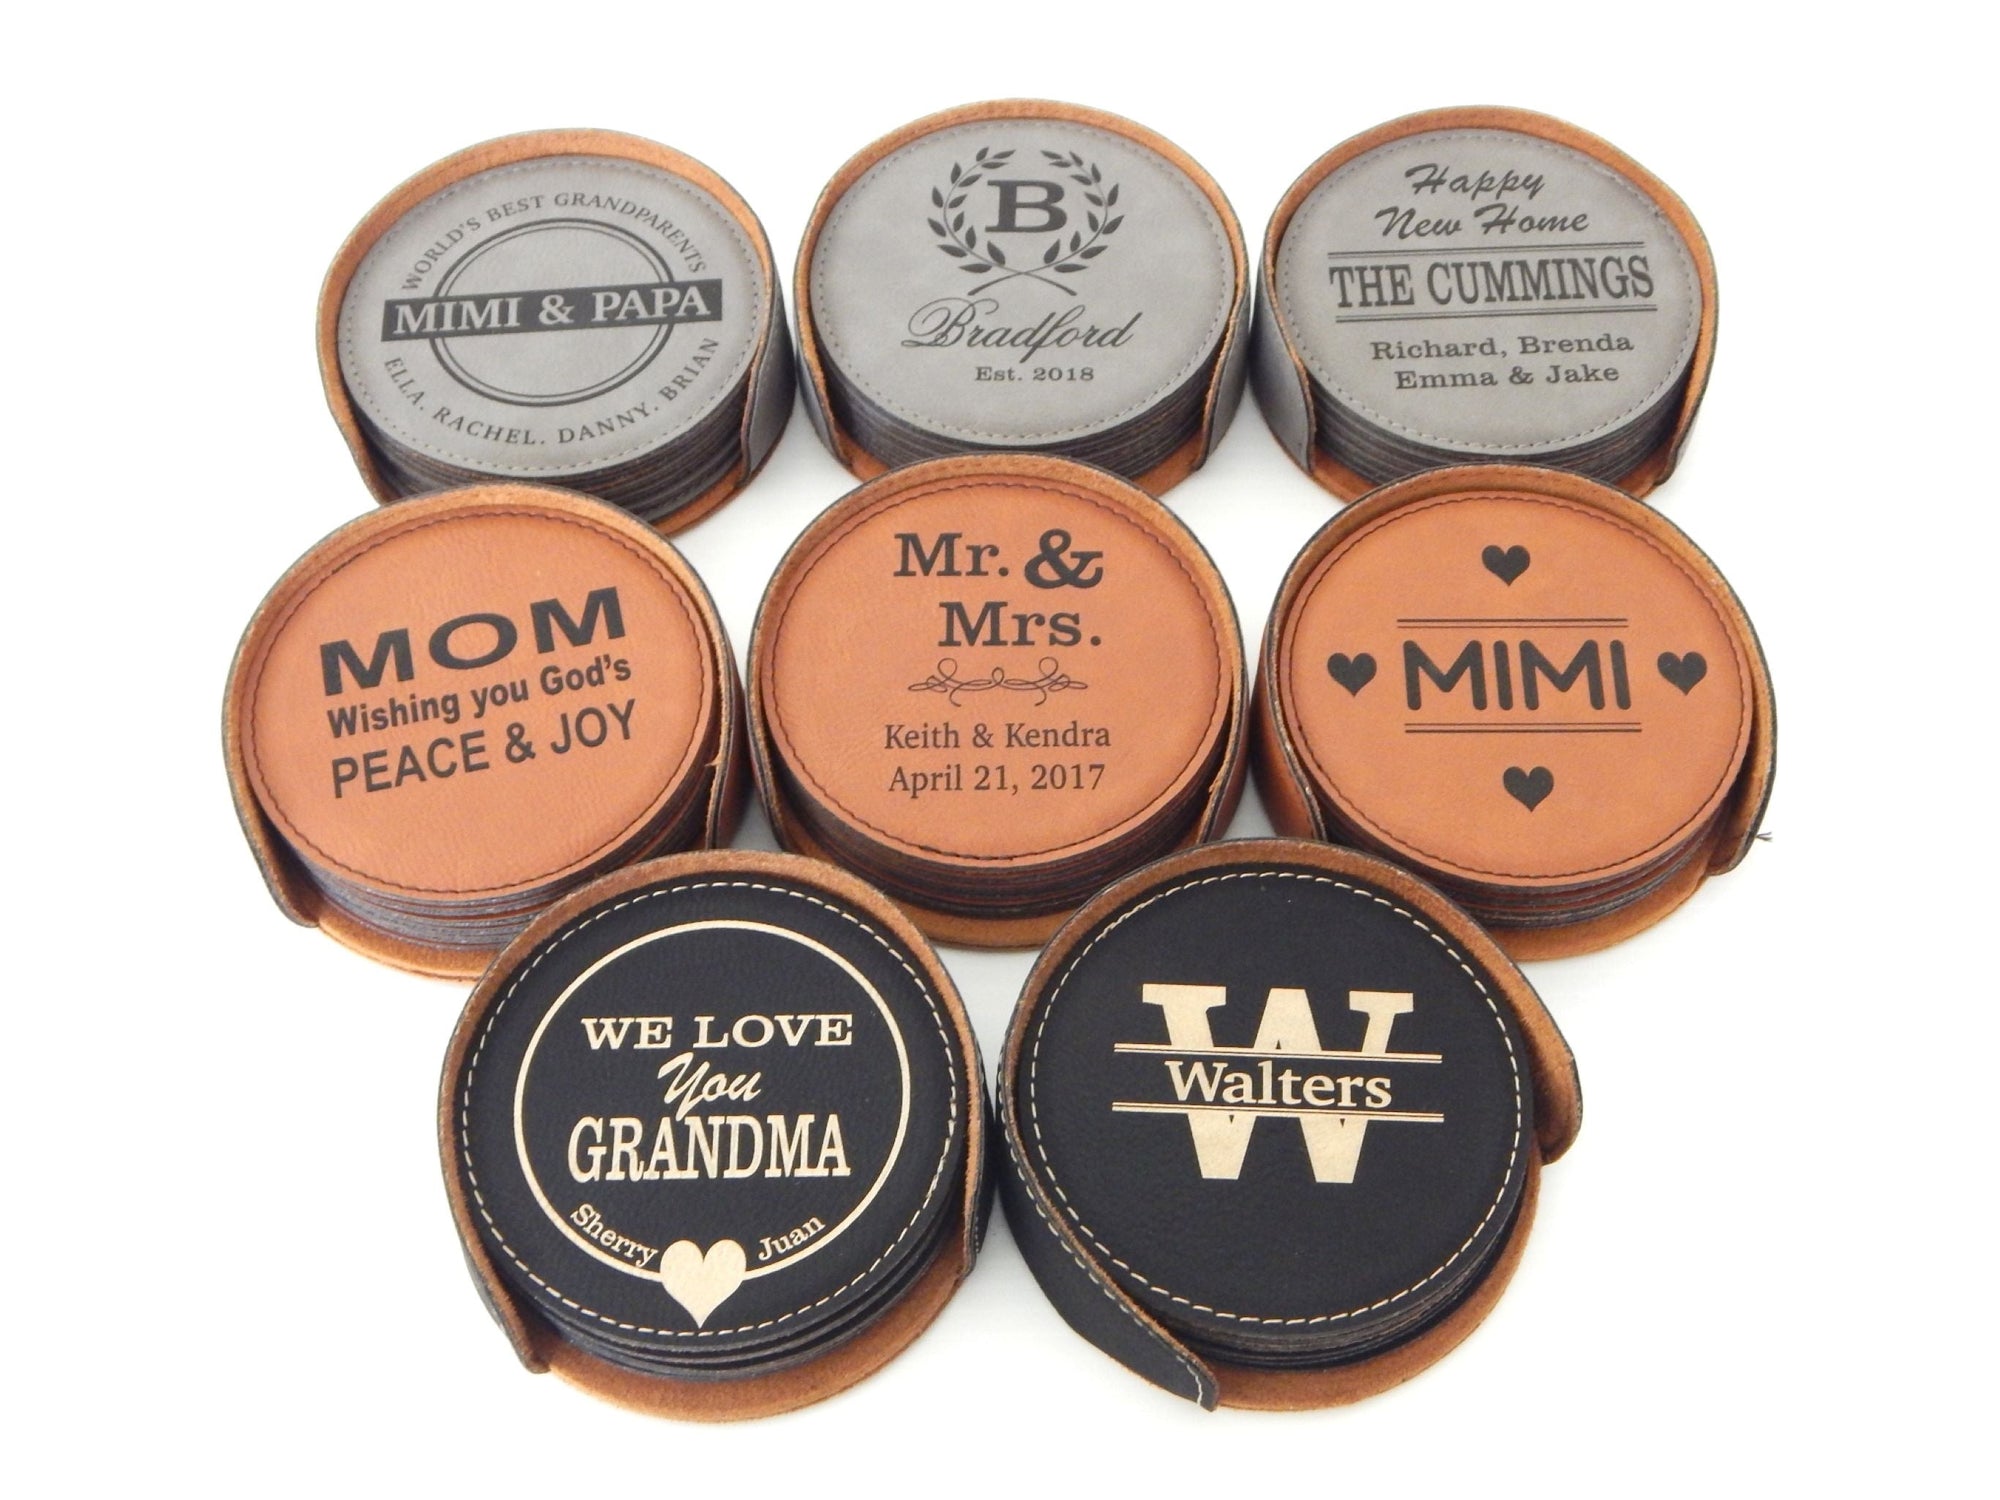 Wedding Gift for Couple | Personalized Anniversary Gifts for Couples | Engraved Coasters